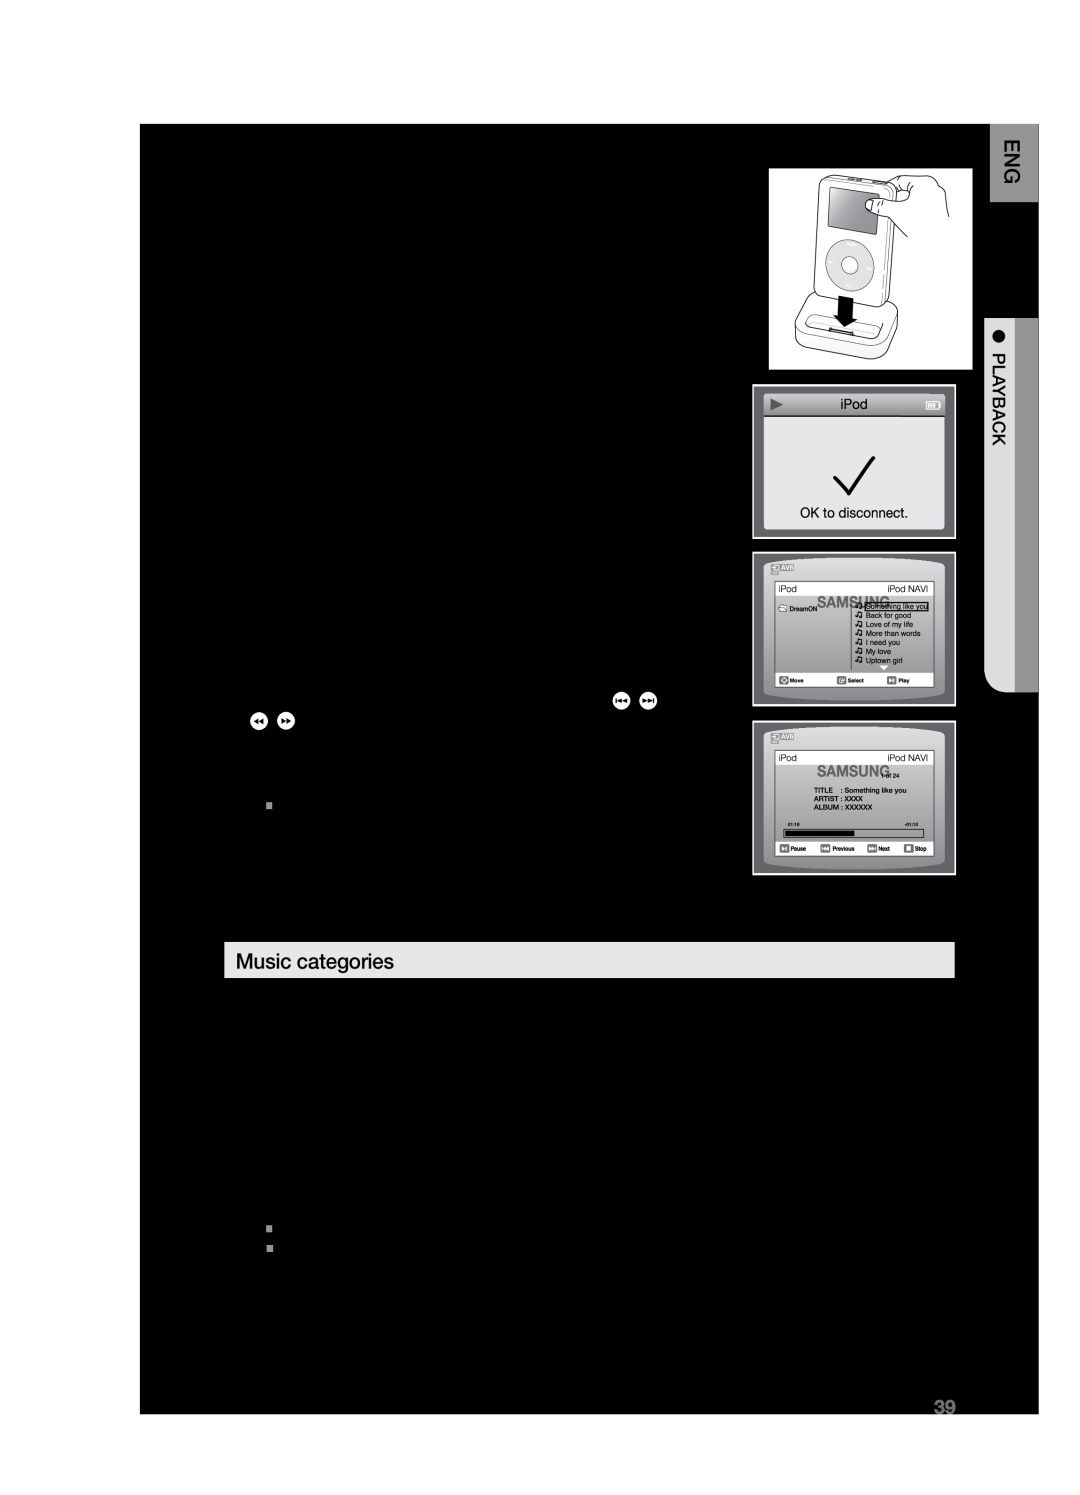 Samsung HT-Z221 user manual Using AN iPod, Listening to Music A iPod function, Music categories 